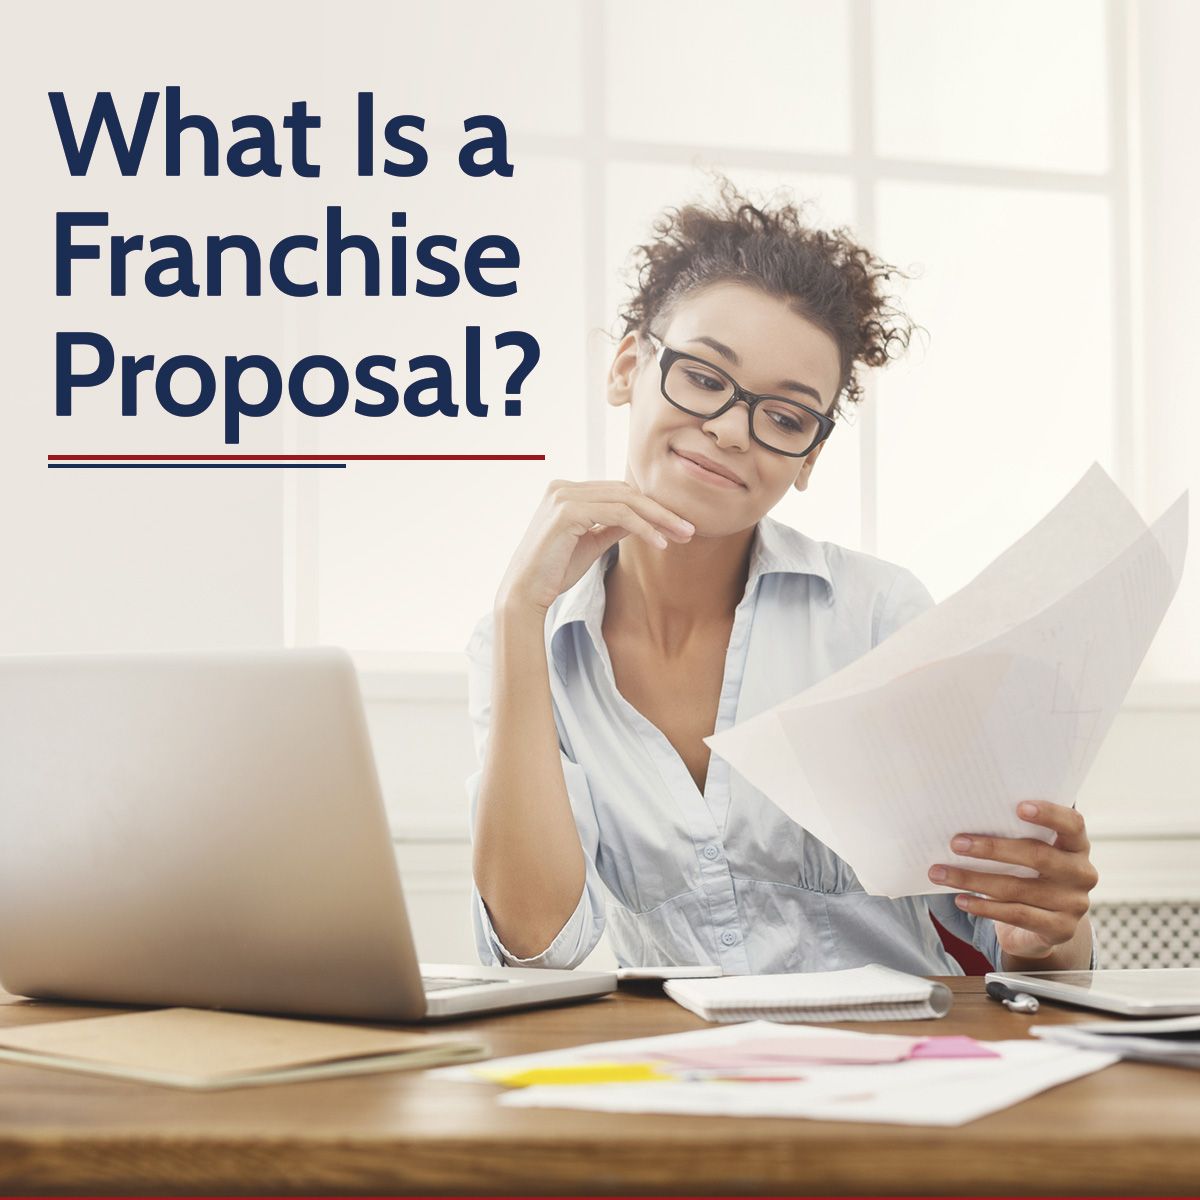 What Is a Franchise Proposal?